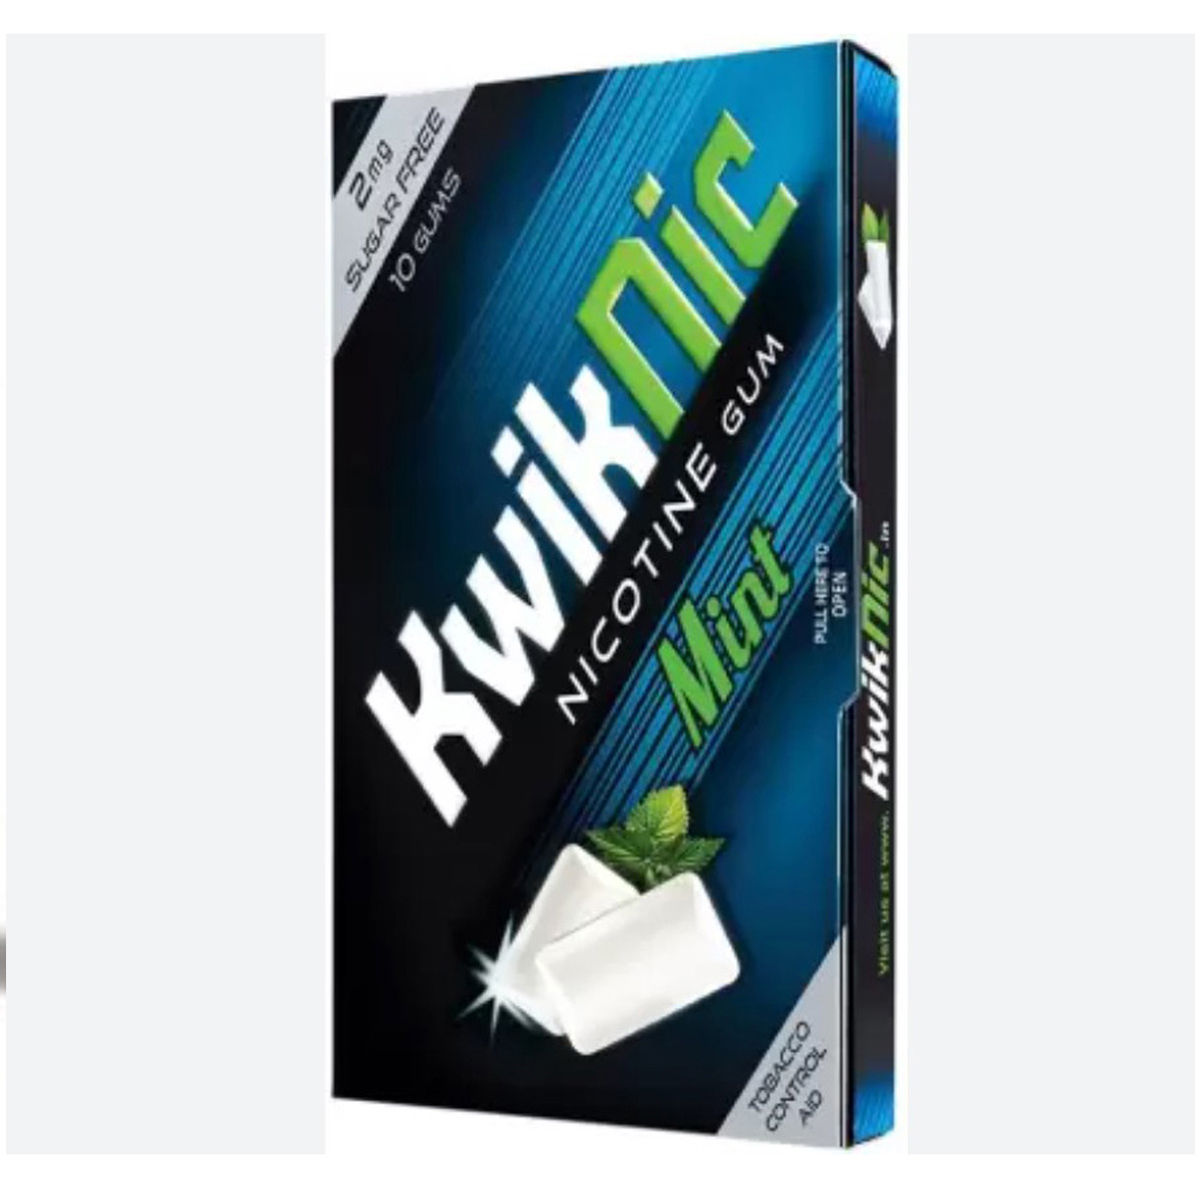 Buy Kwiknic Nicotine 2 mg Mint Flavour, 10 Chewing Gum Online